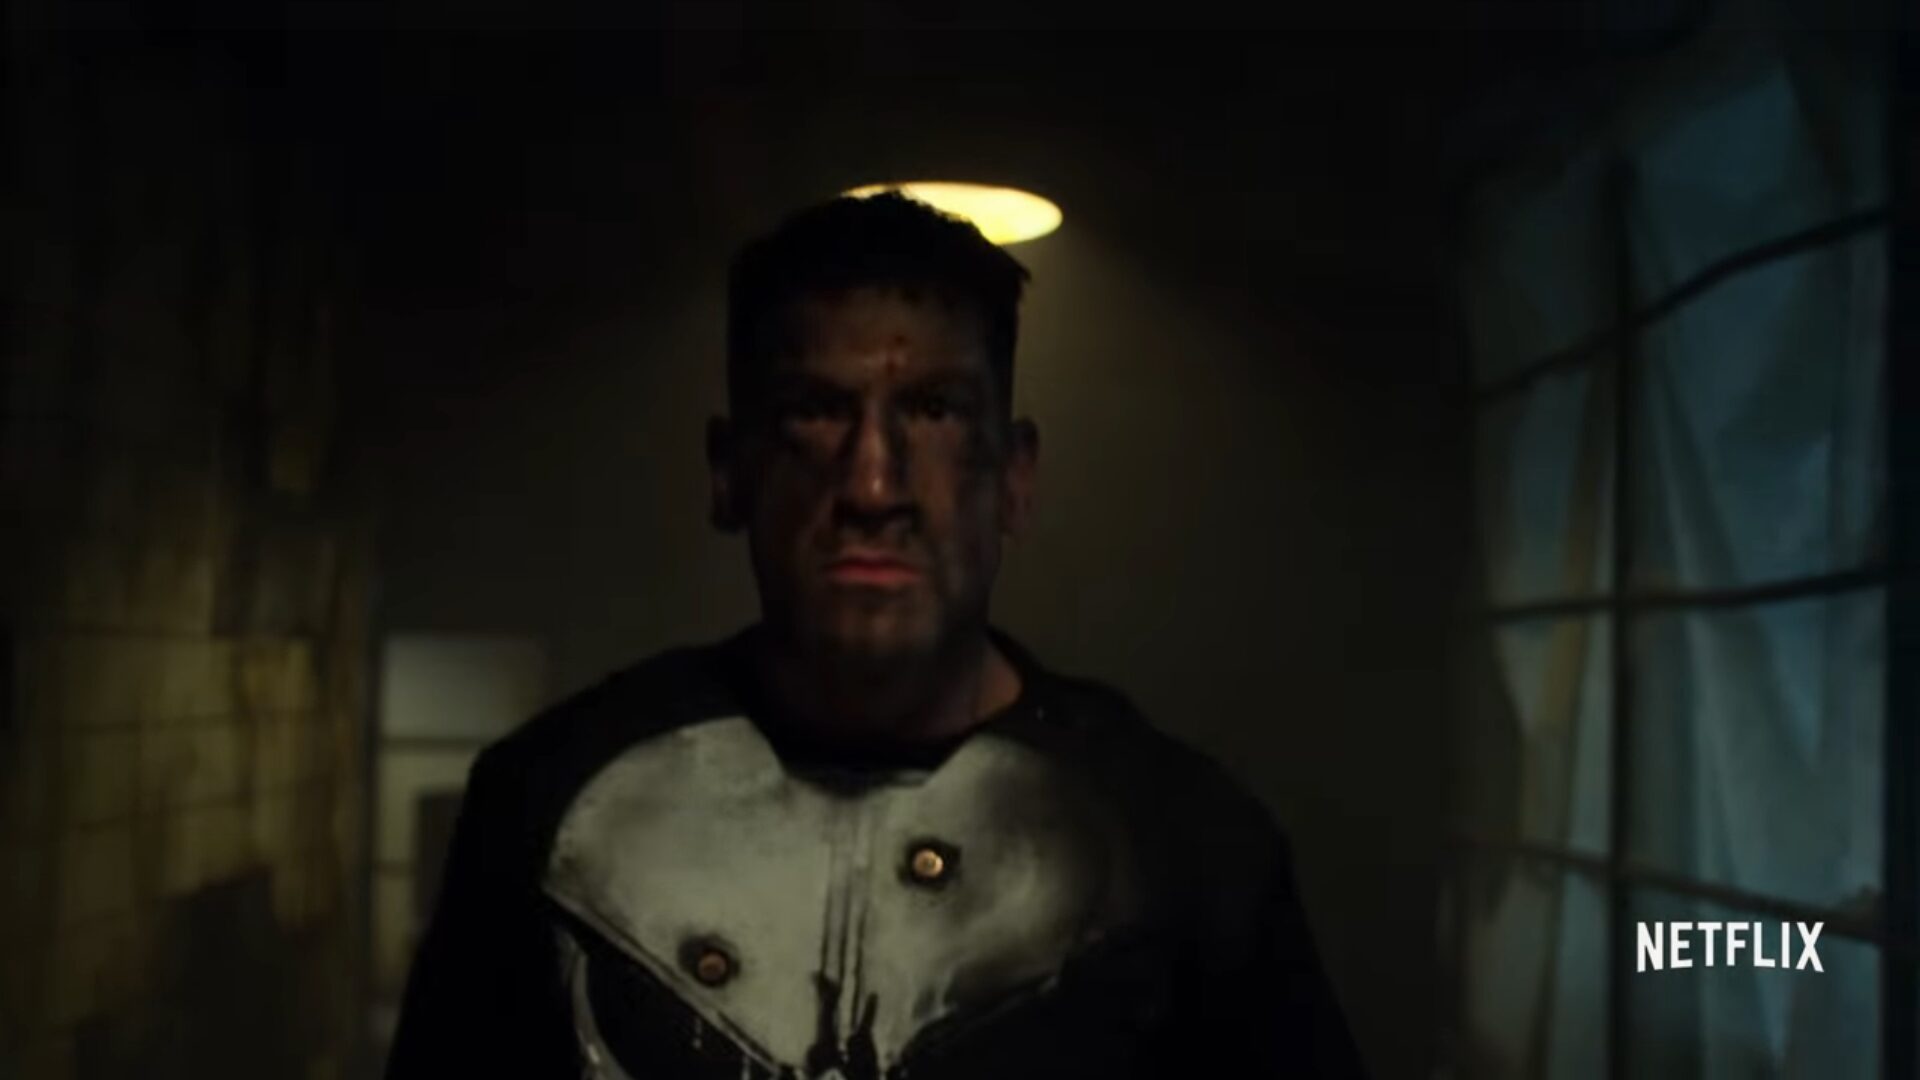 SDCC 2017: Netflix’s The Punisher Surprises with Trailer